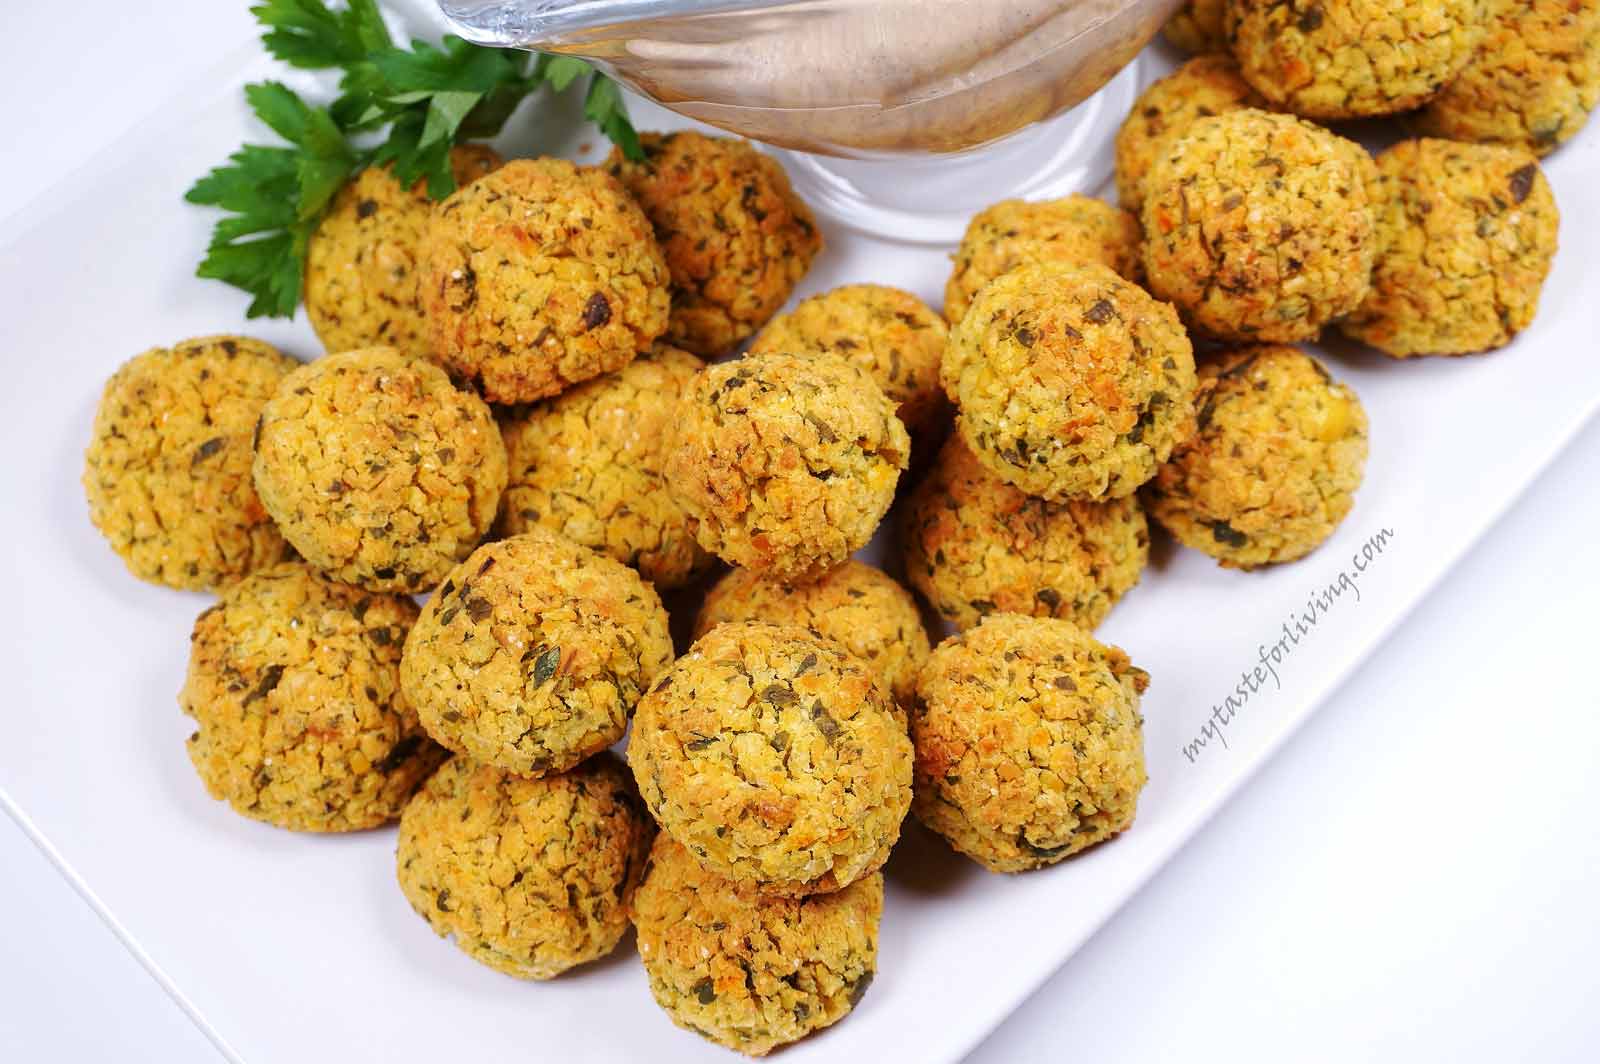 Delicious vegan chickpea balls (or falafels) that I adore! They are extremely easy to prepare and I highly recommend you try them!